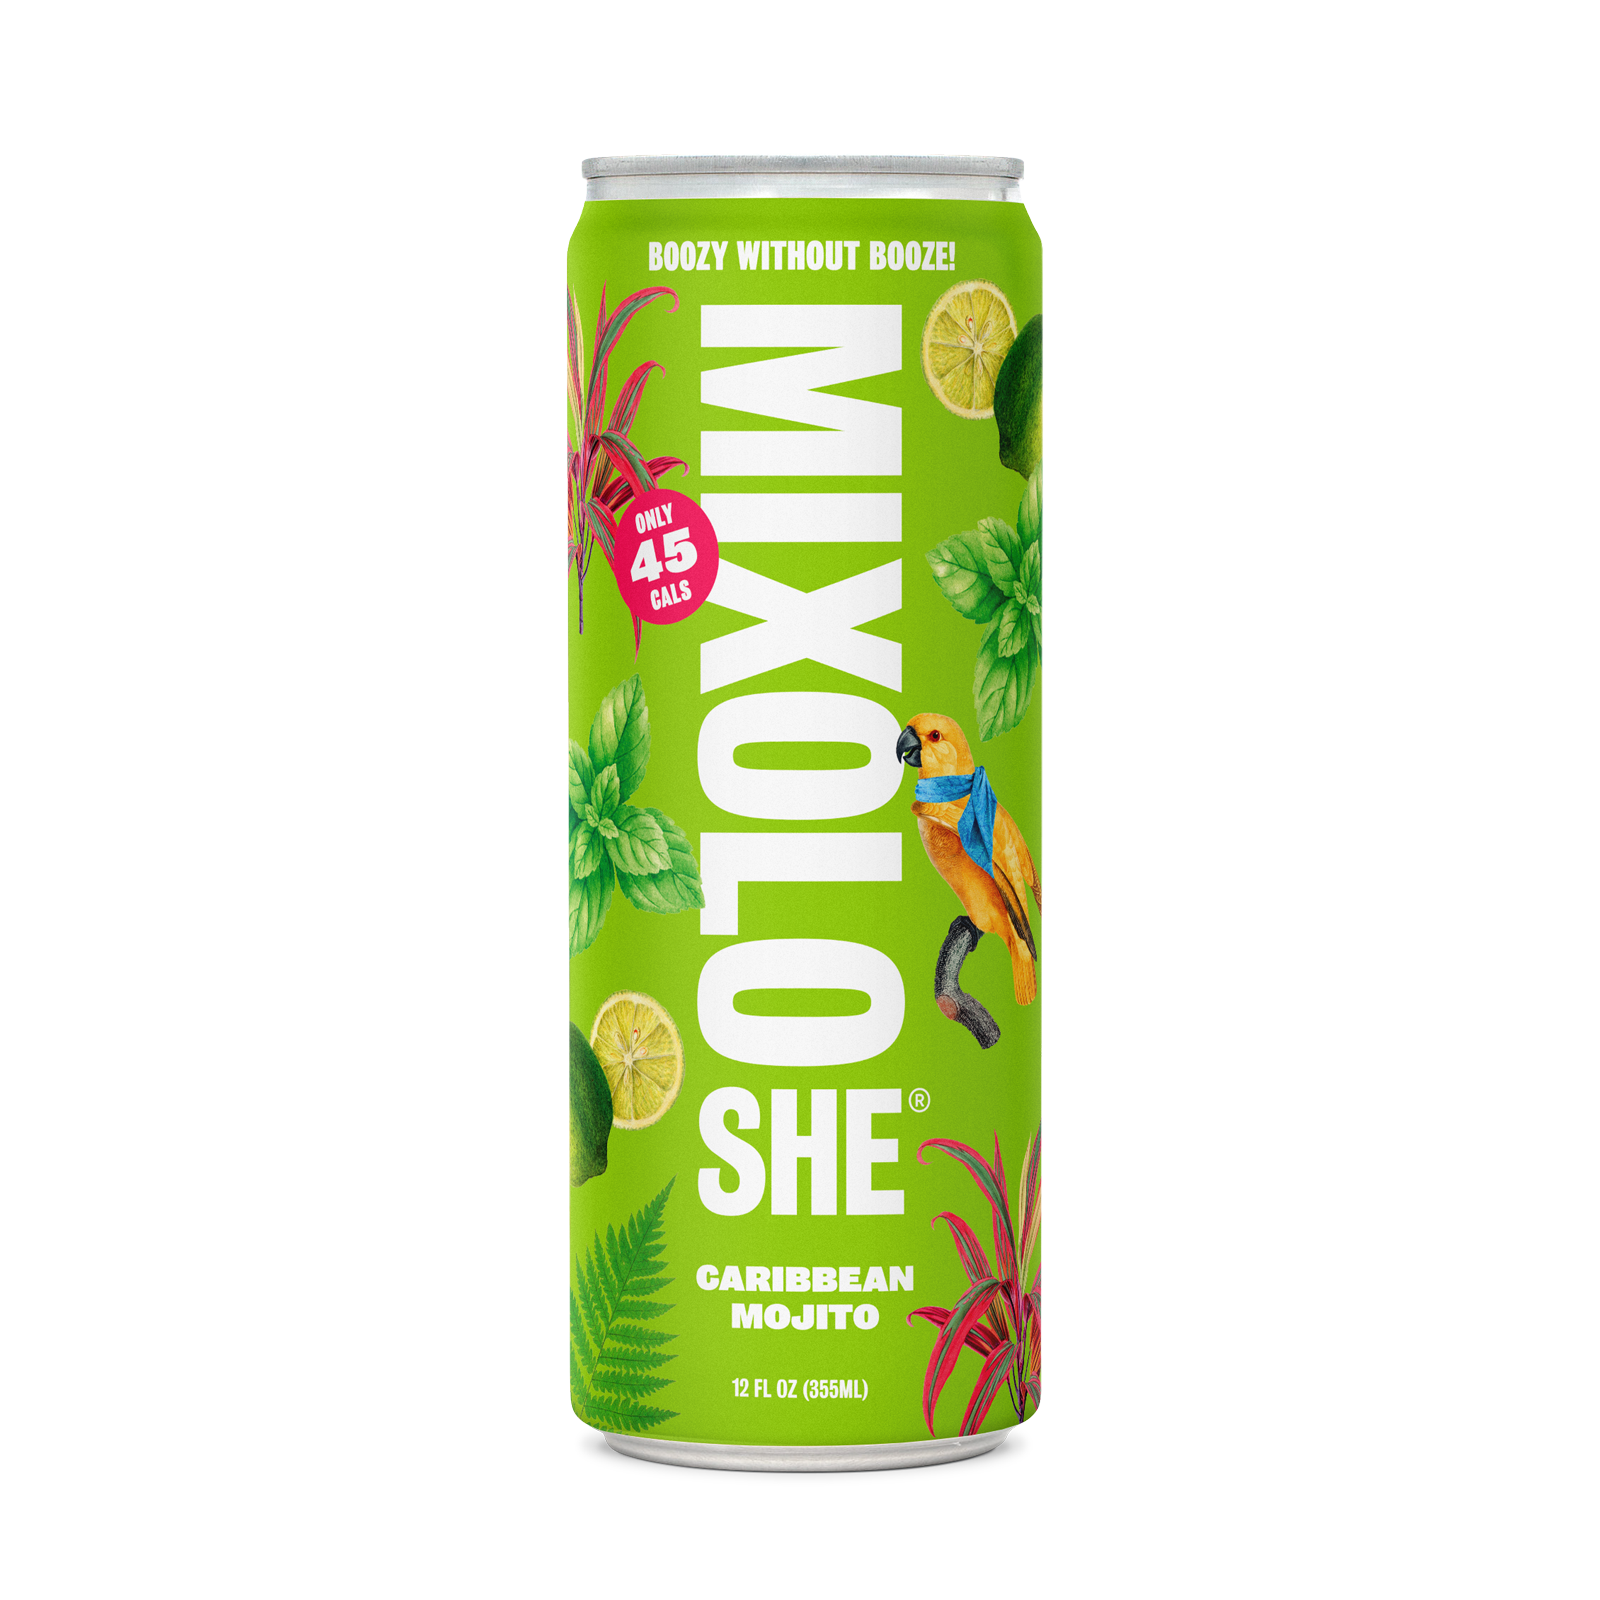 Caribbean Mojito Mocktail in a Can, Less than 45 calories and low sugar. 